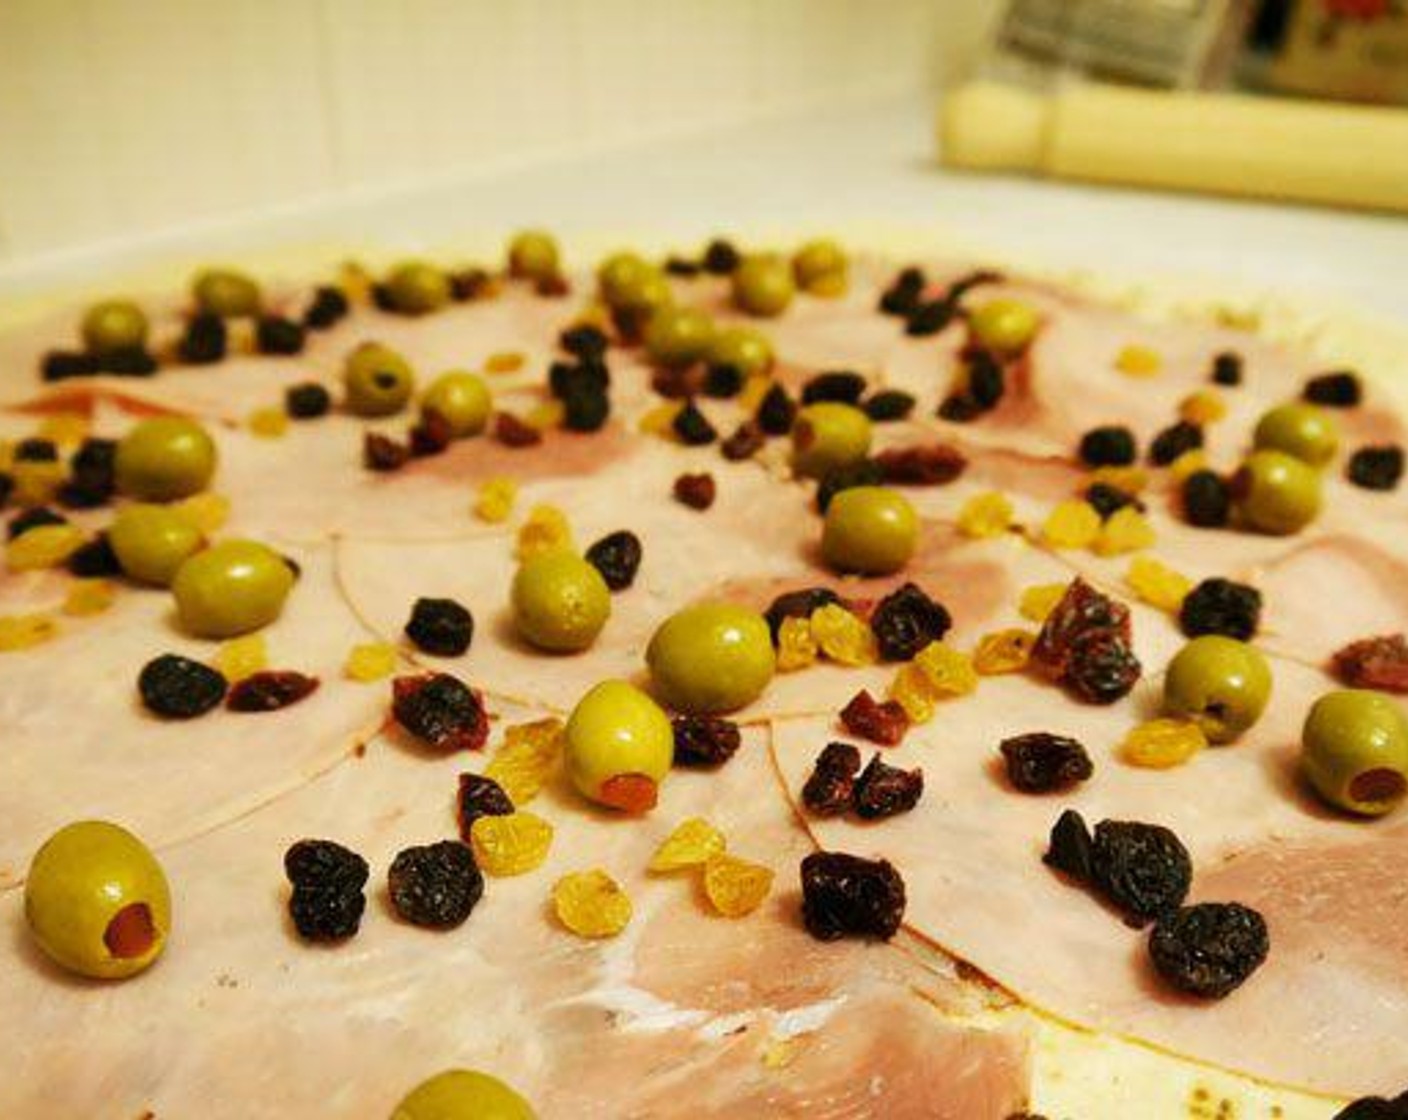 step 6 Place a layer of Prosciutto (9 oz), then a layer of Raisins (1/2 cup) and finish with a layer of the Pitted Green Olives (1 cup).